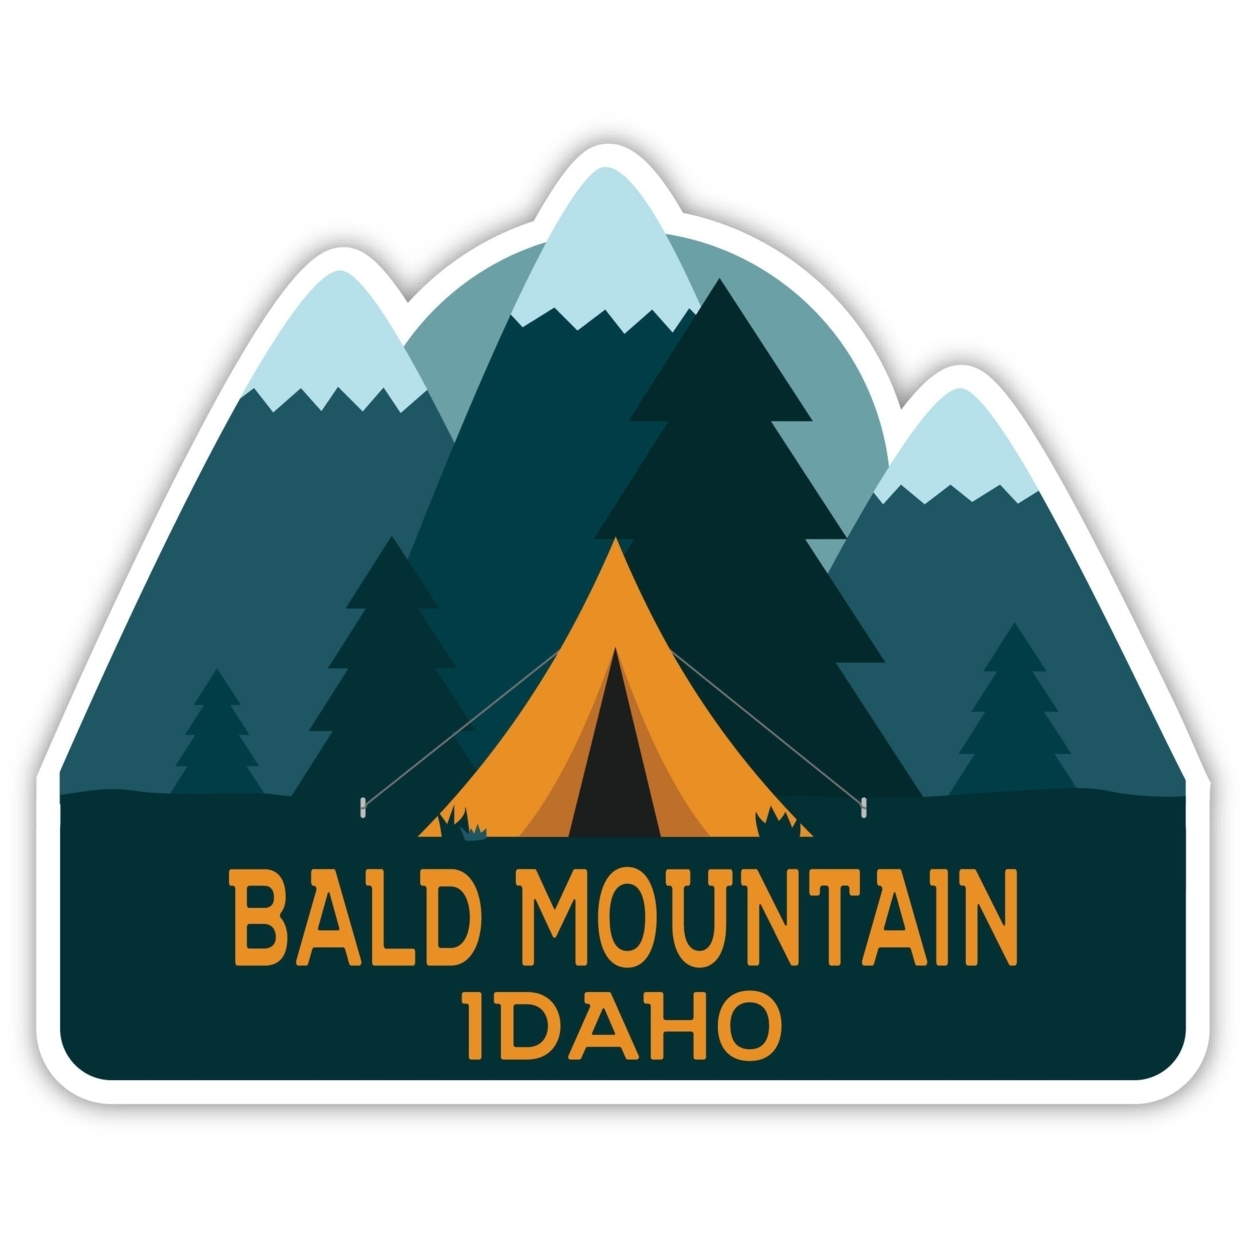 Bald Mountain Idaho Souvenir Decorative Stickers (Choose Theme And Size) - 4-Pack, 10-Inch, Tent